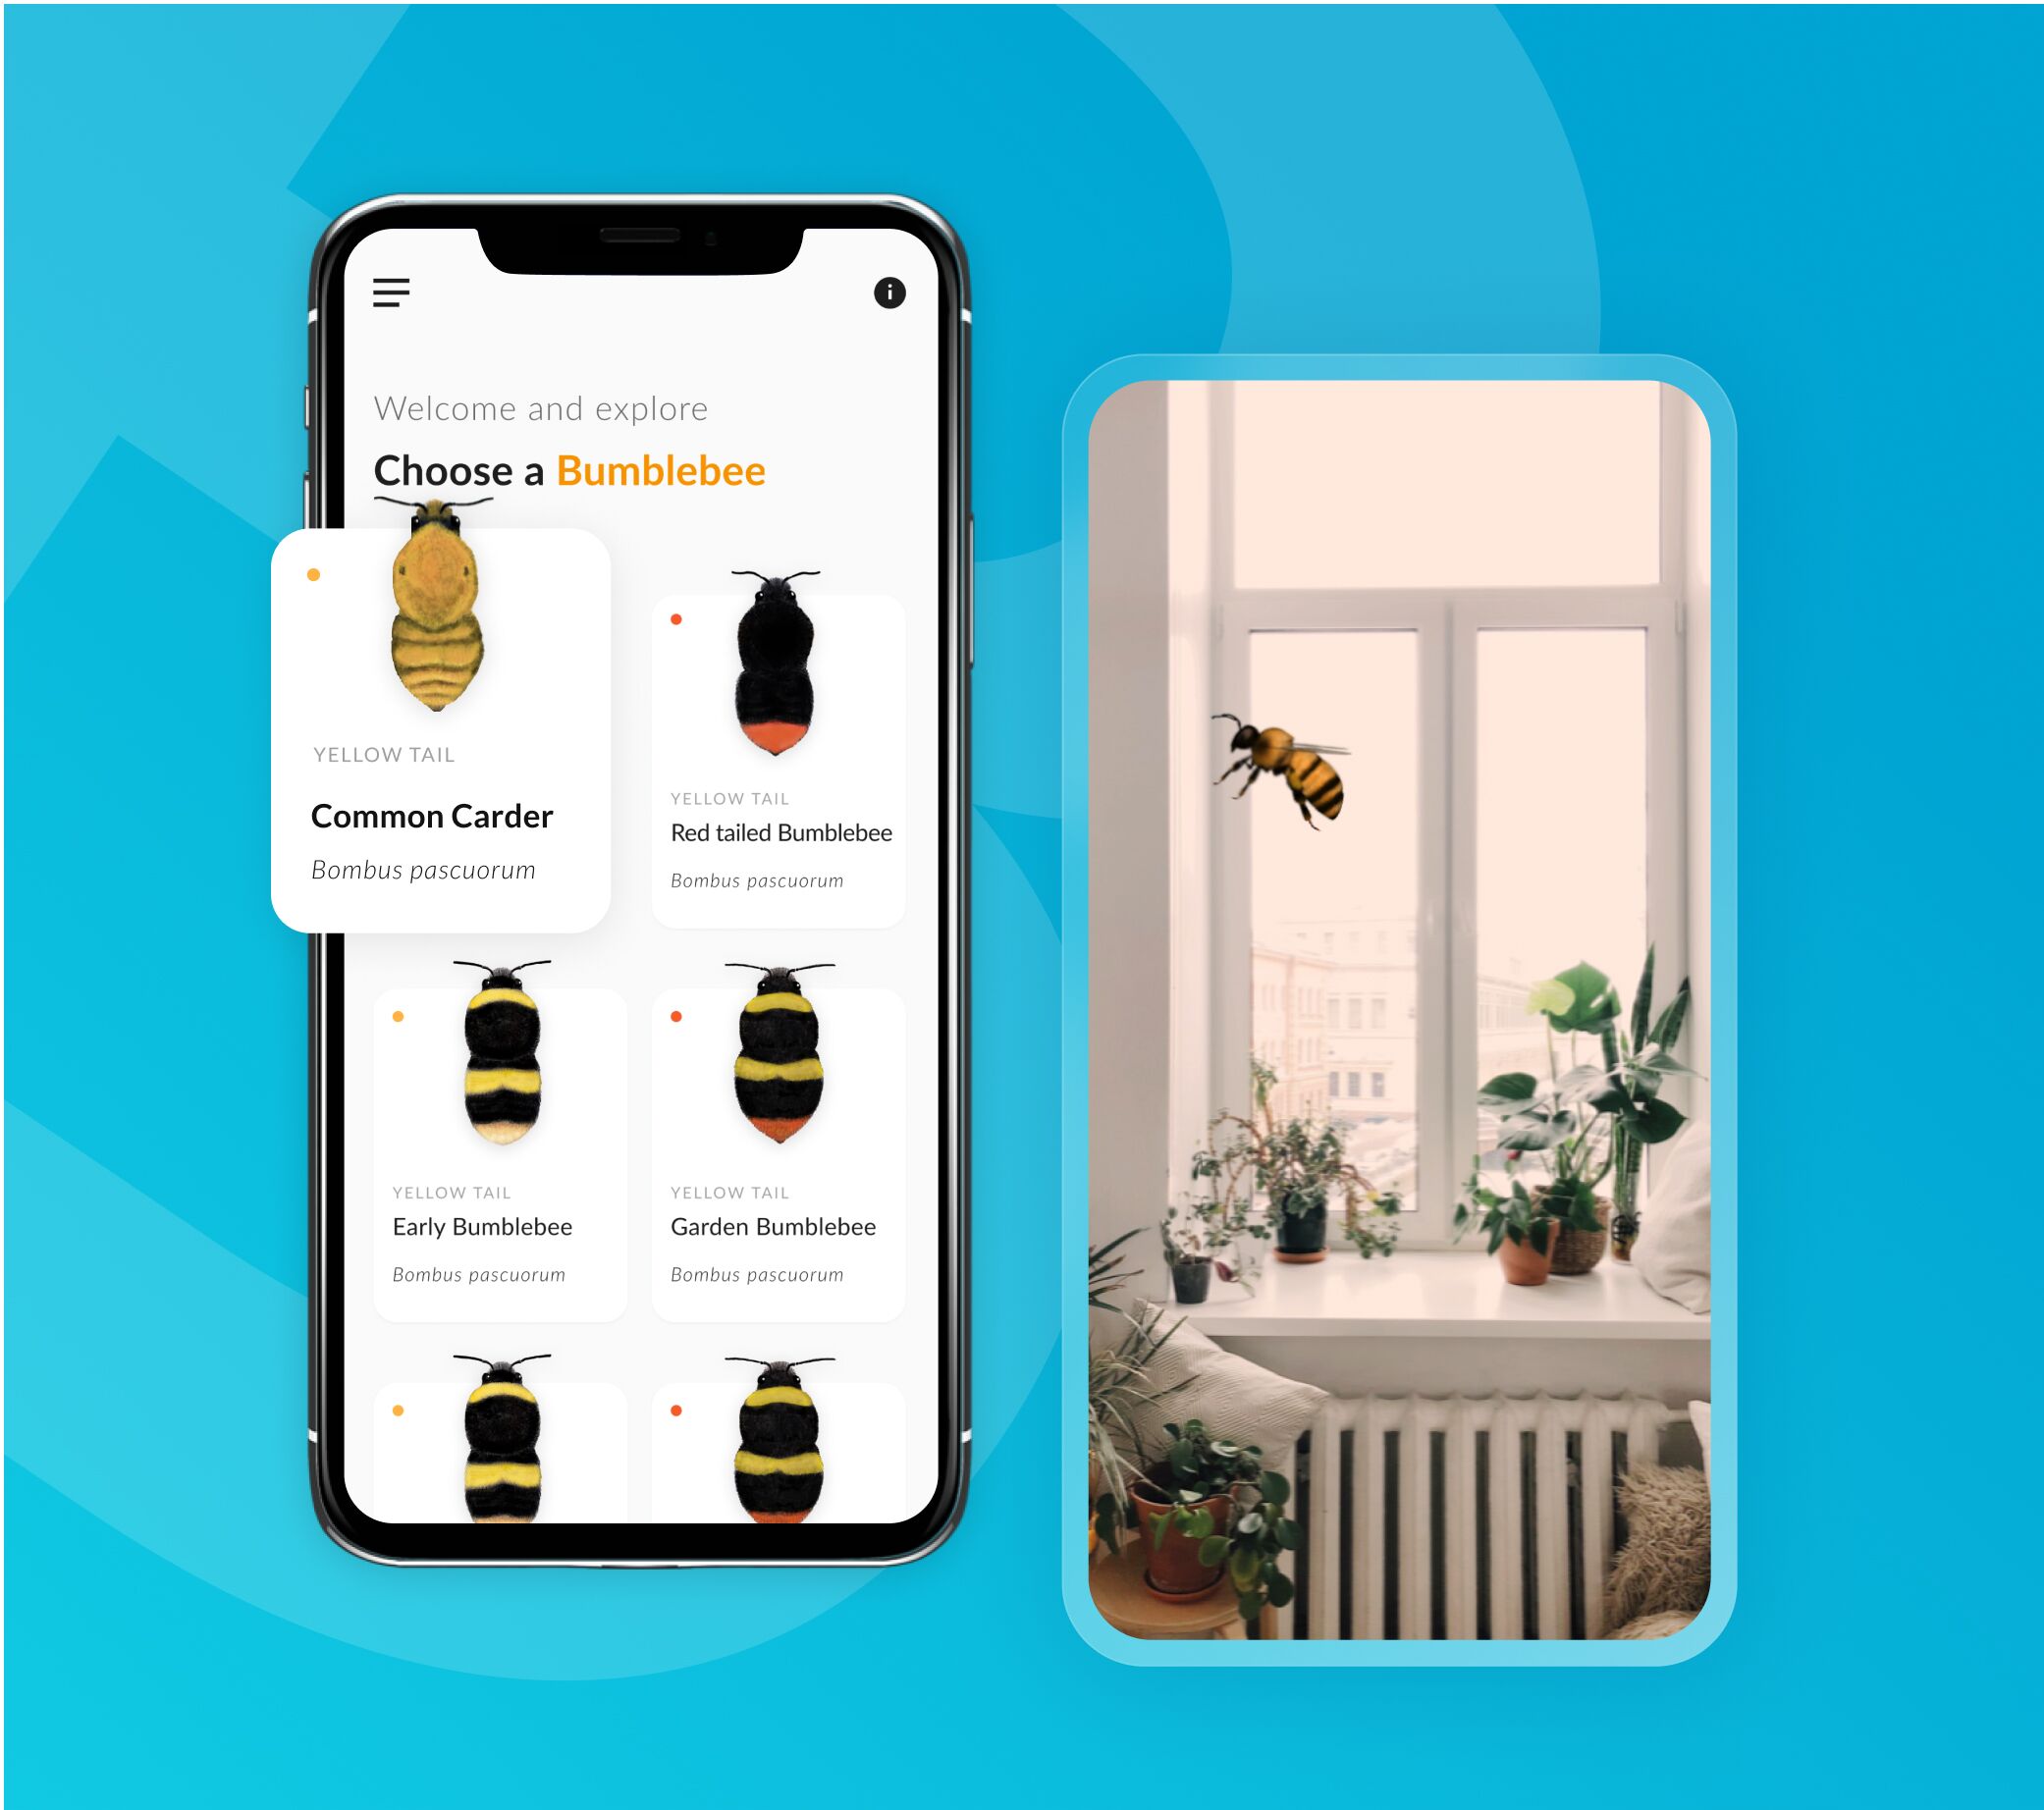 Award-winning What’s that bumblebee app built for Bumblebee Conservation Trust